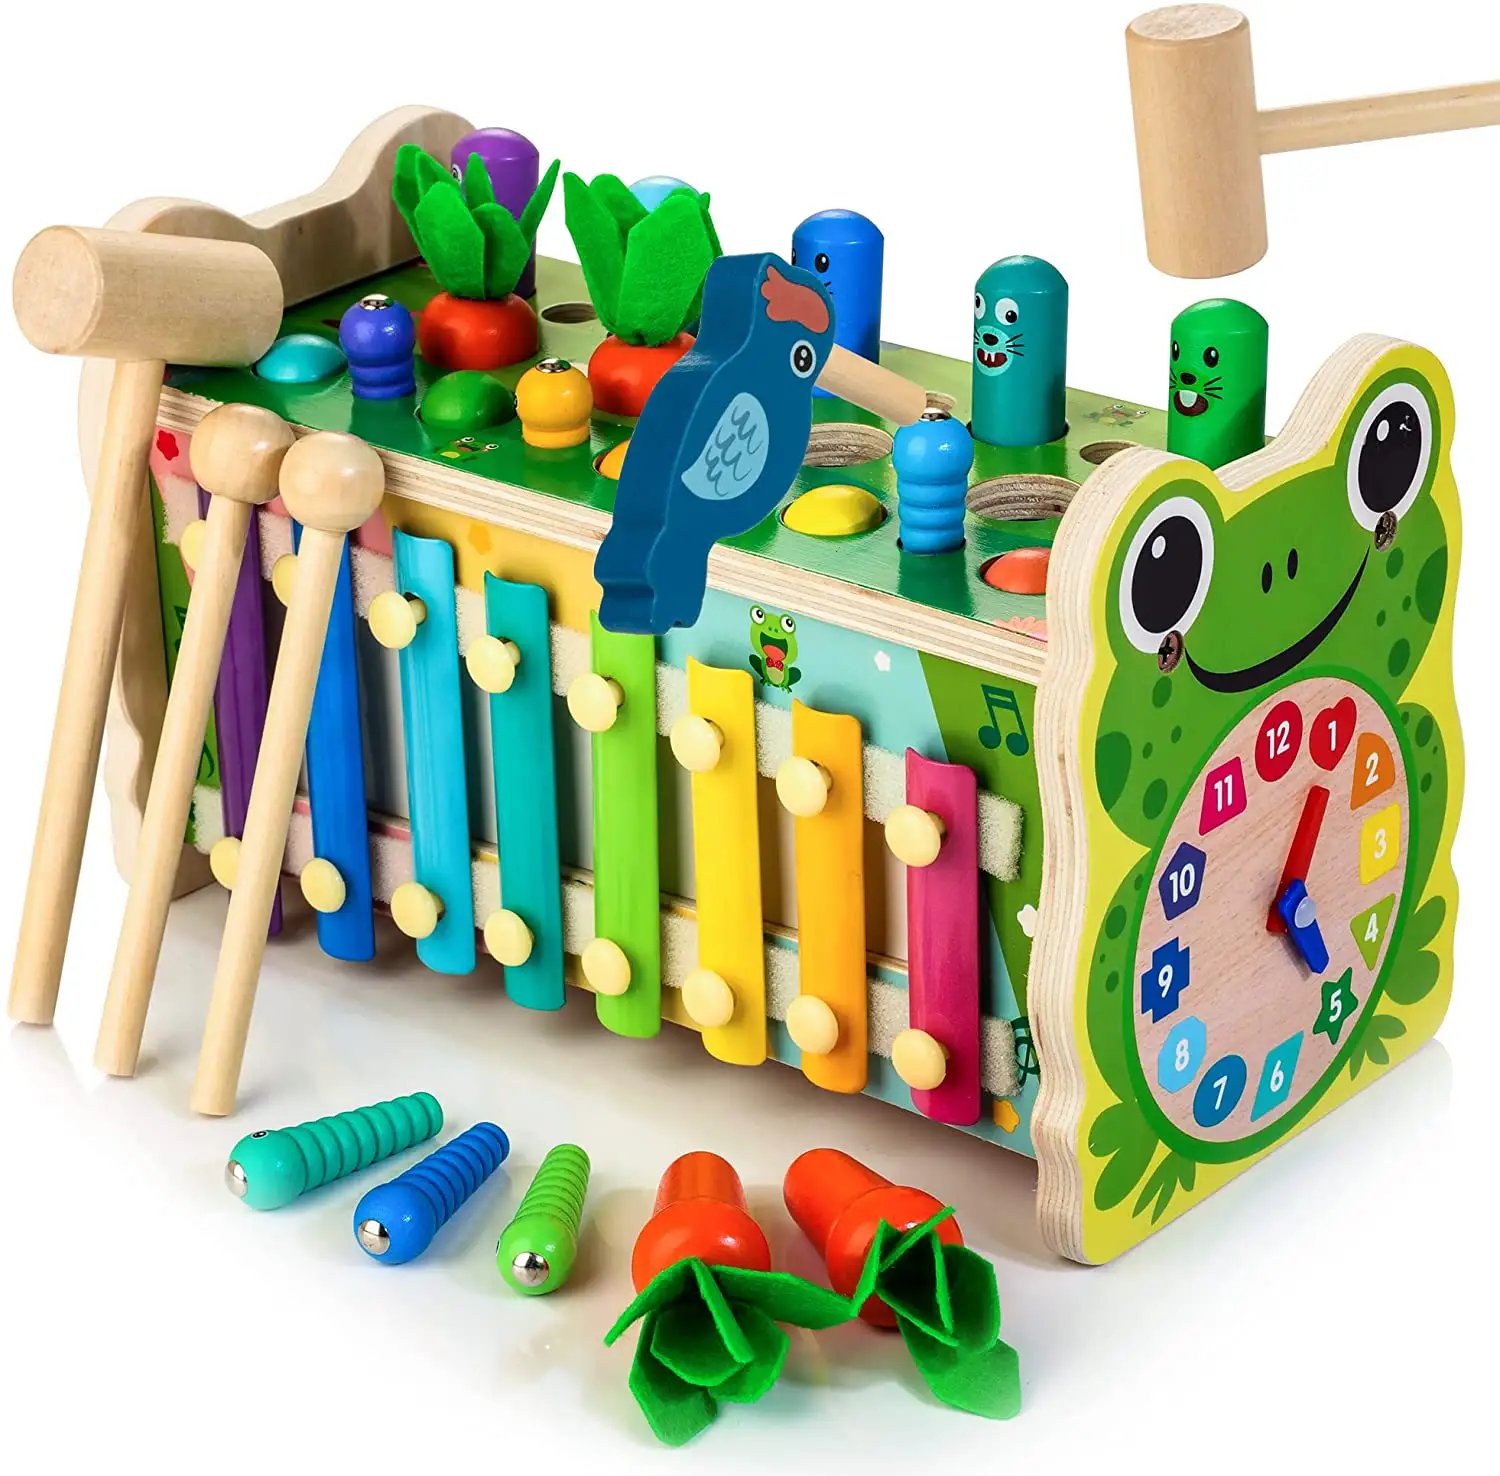 Wooden Pounding and Hammer Toy Early Educational Toy with Fishing Game Xylophone Moving Gears Clock Multiple Ways To Play